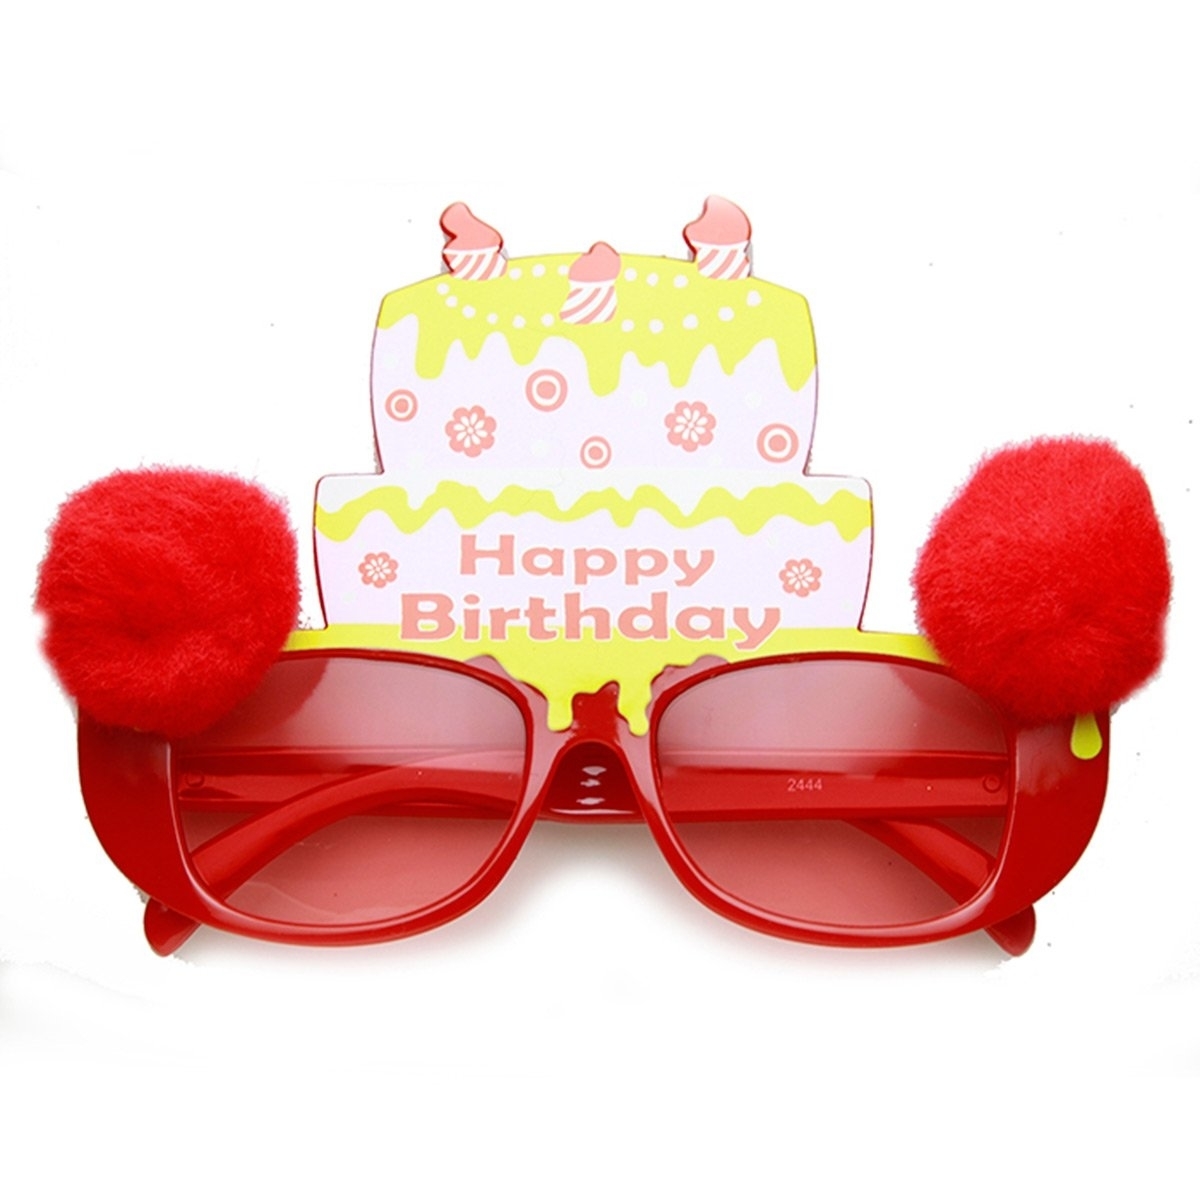 Happy Birthday Cake Furry Ball Colorful Bday Party Sunglasses - Green Green